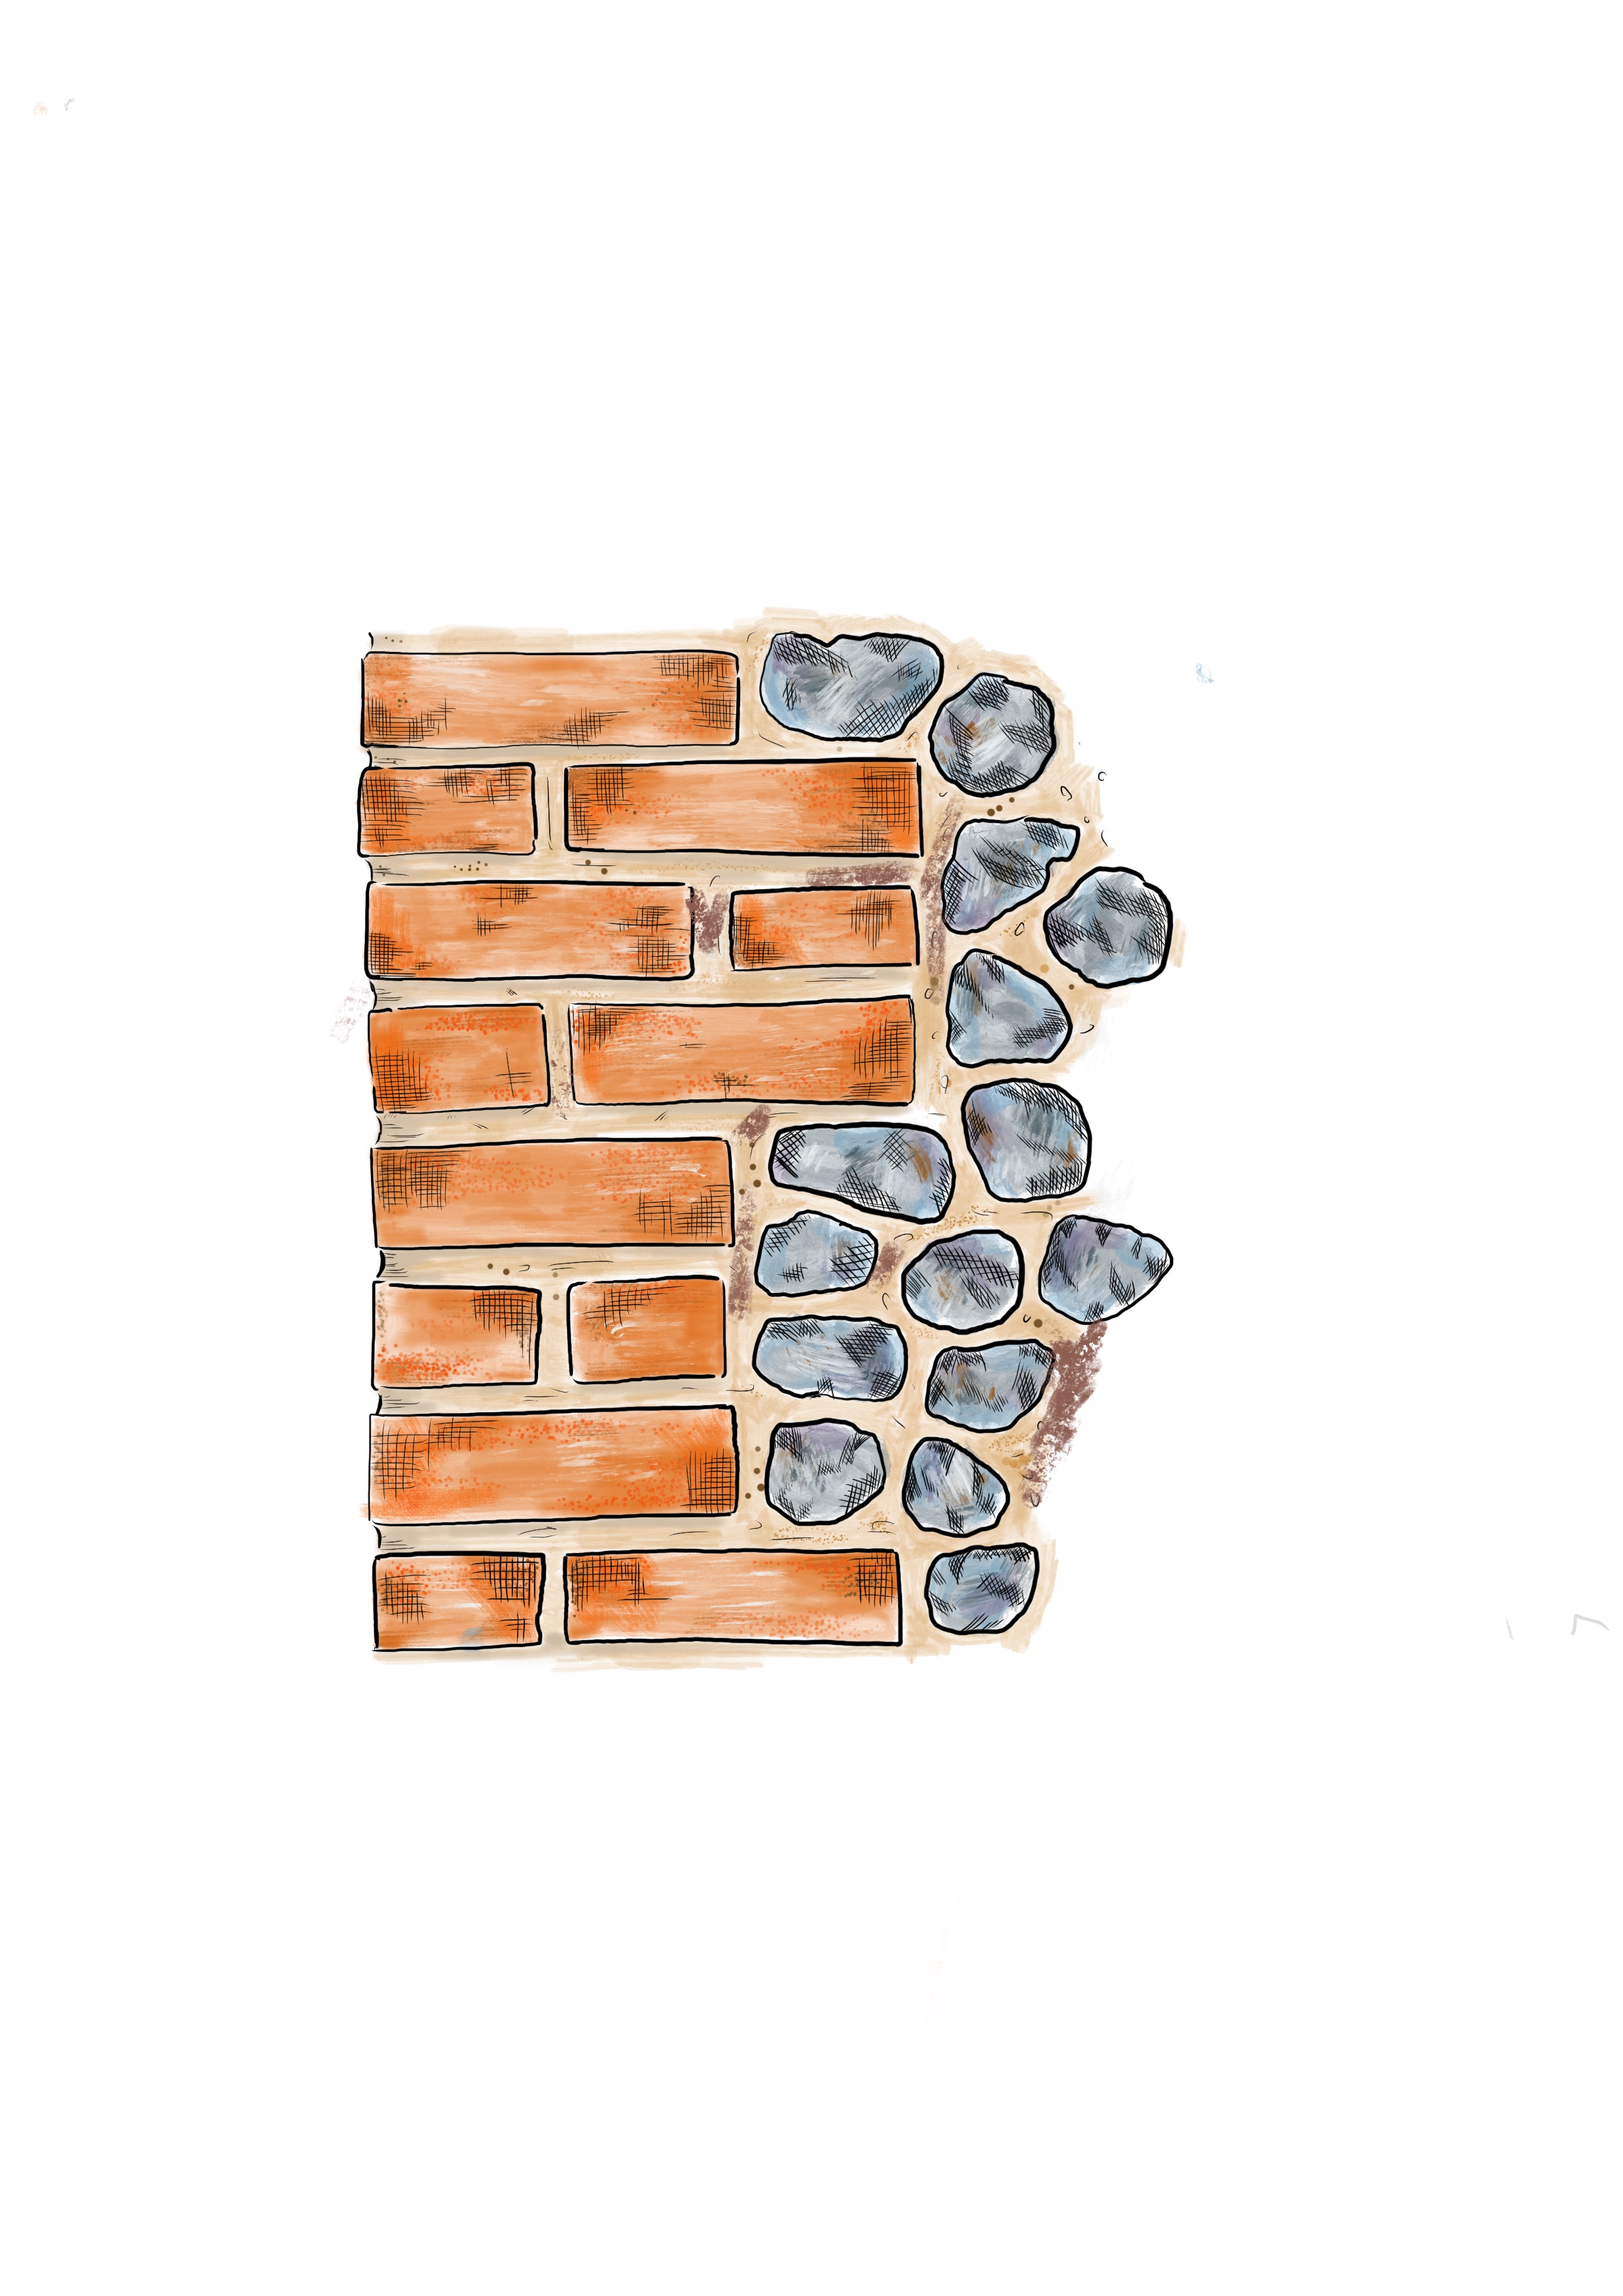 Typical dressing, brick to flint (also know as quoin detailing).